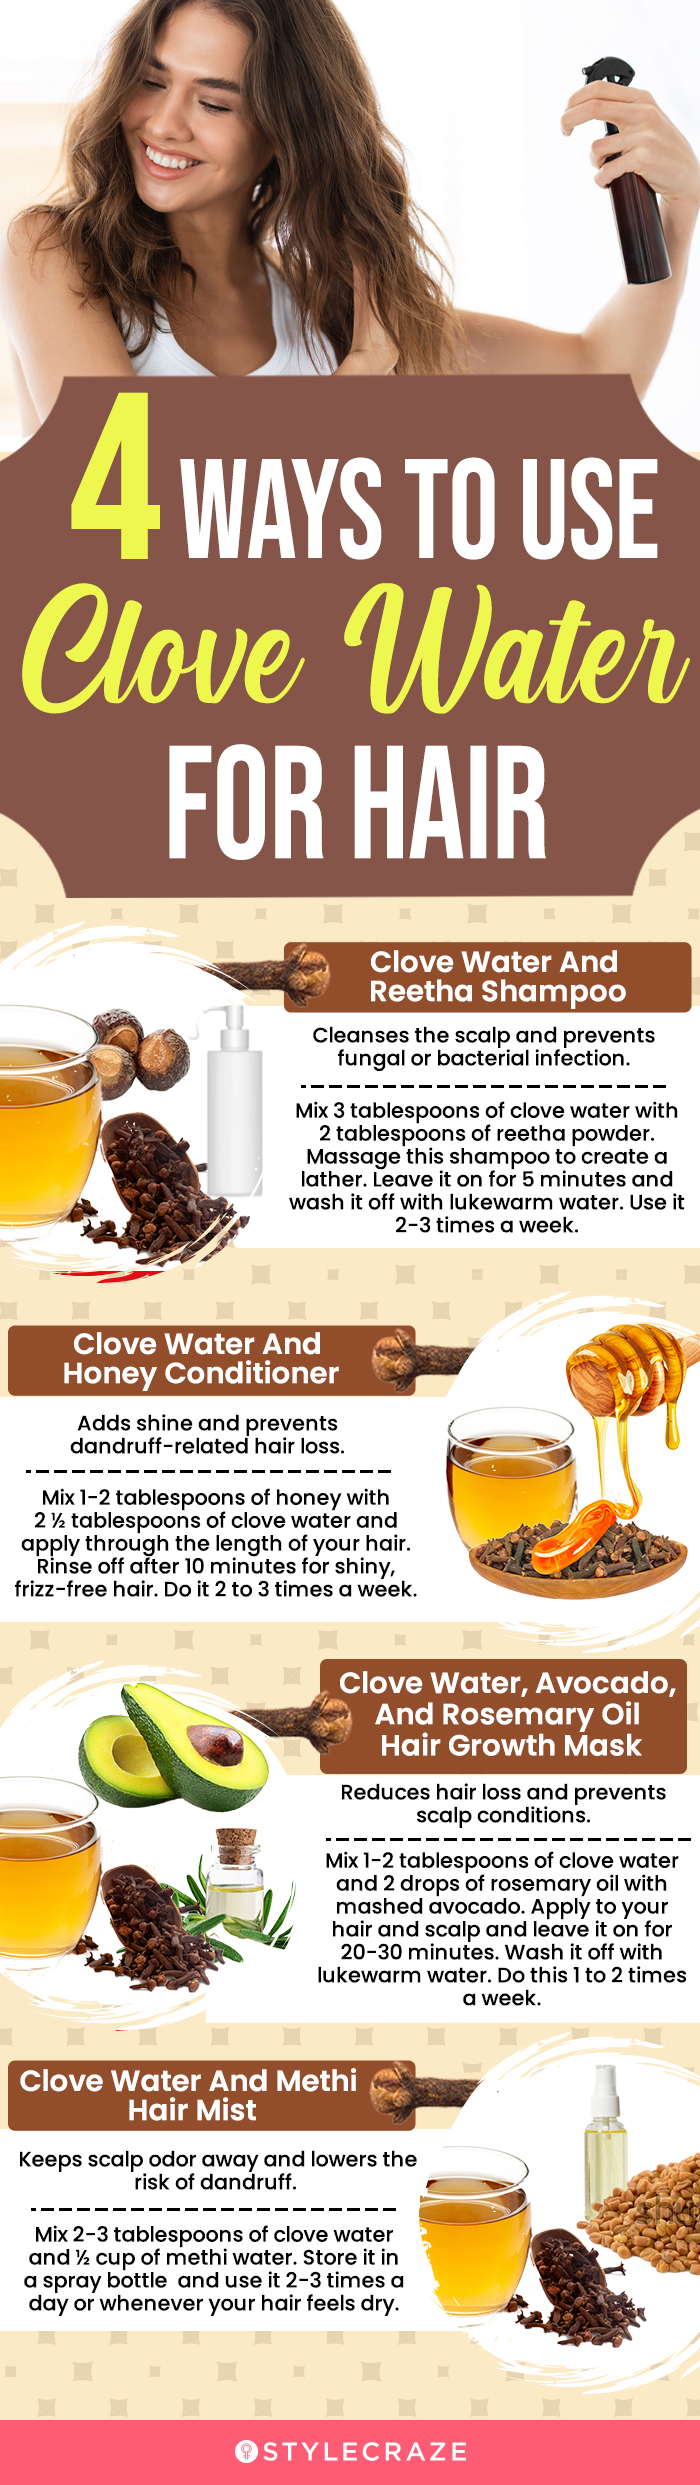 4 ways to use clove water for hair (infographic)